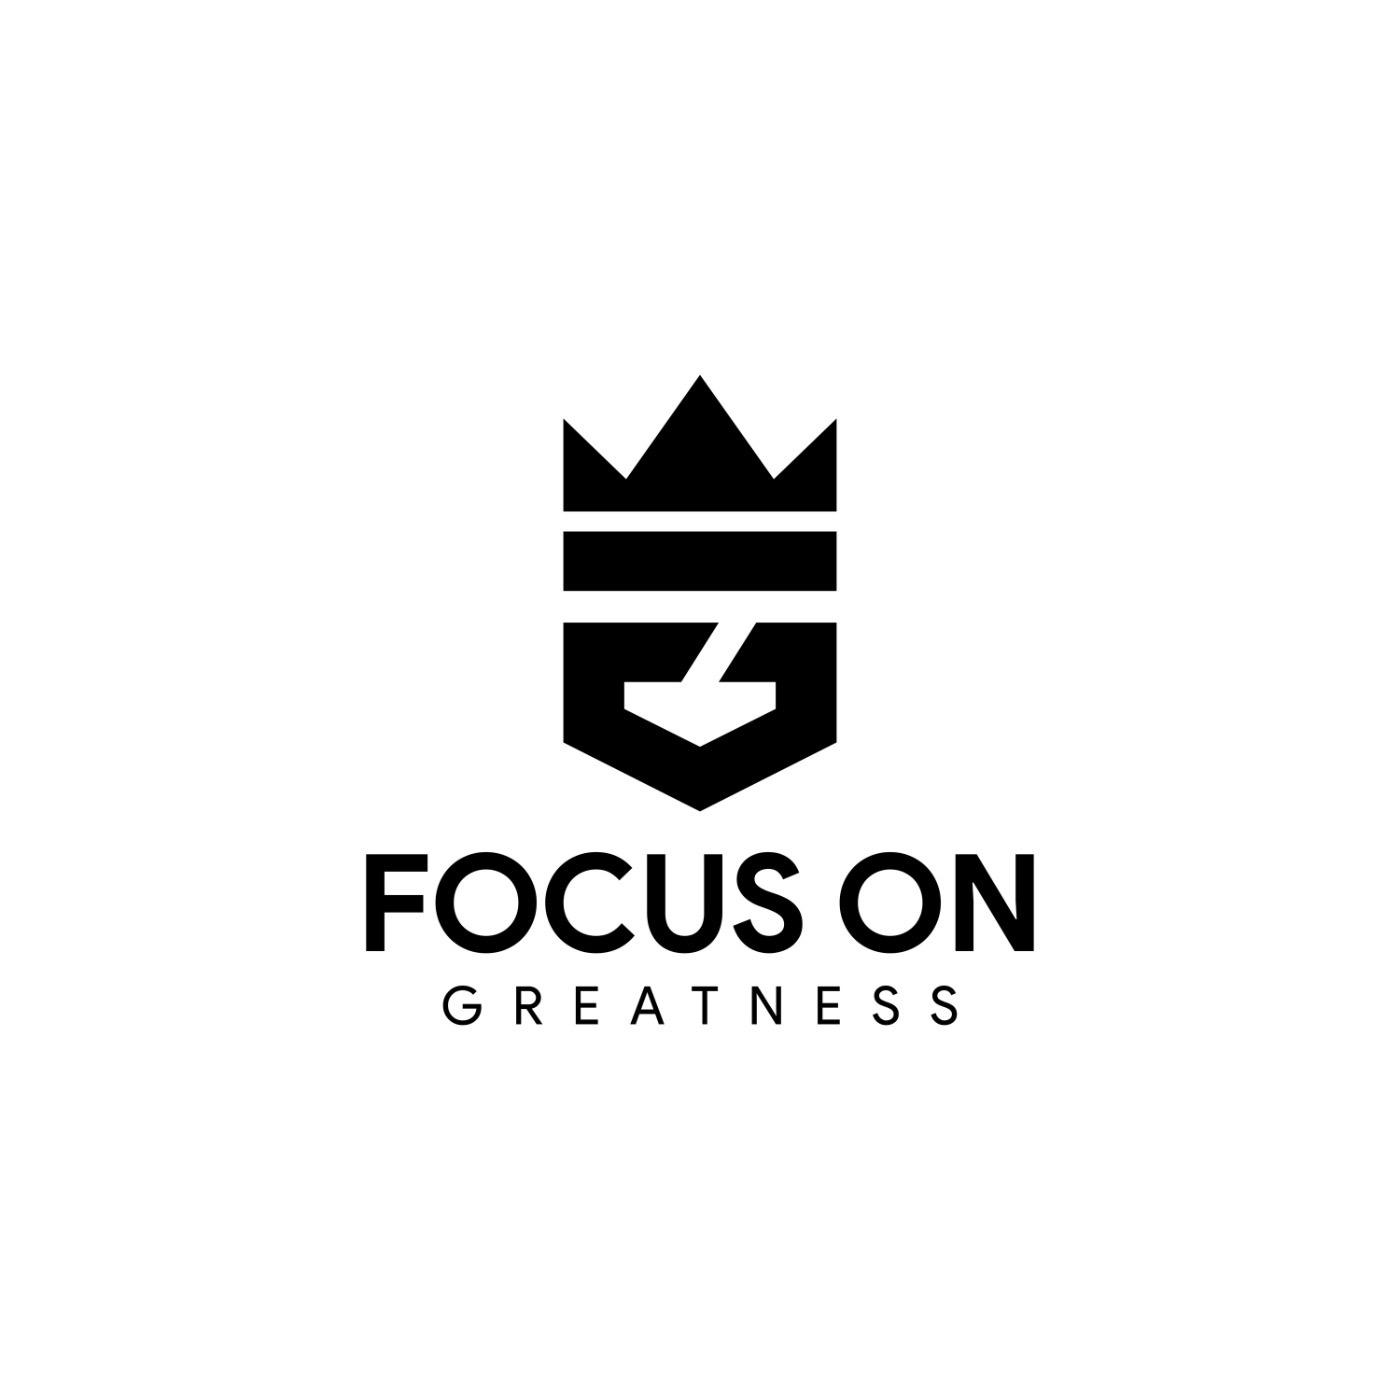 Focus on Greatness